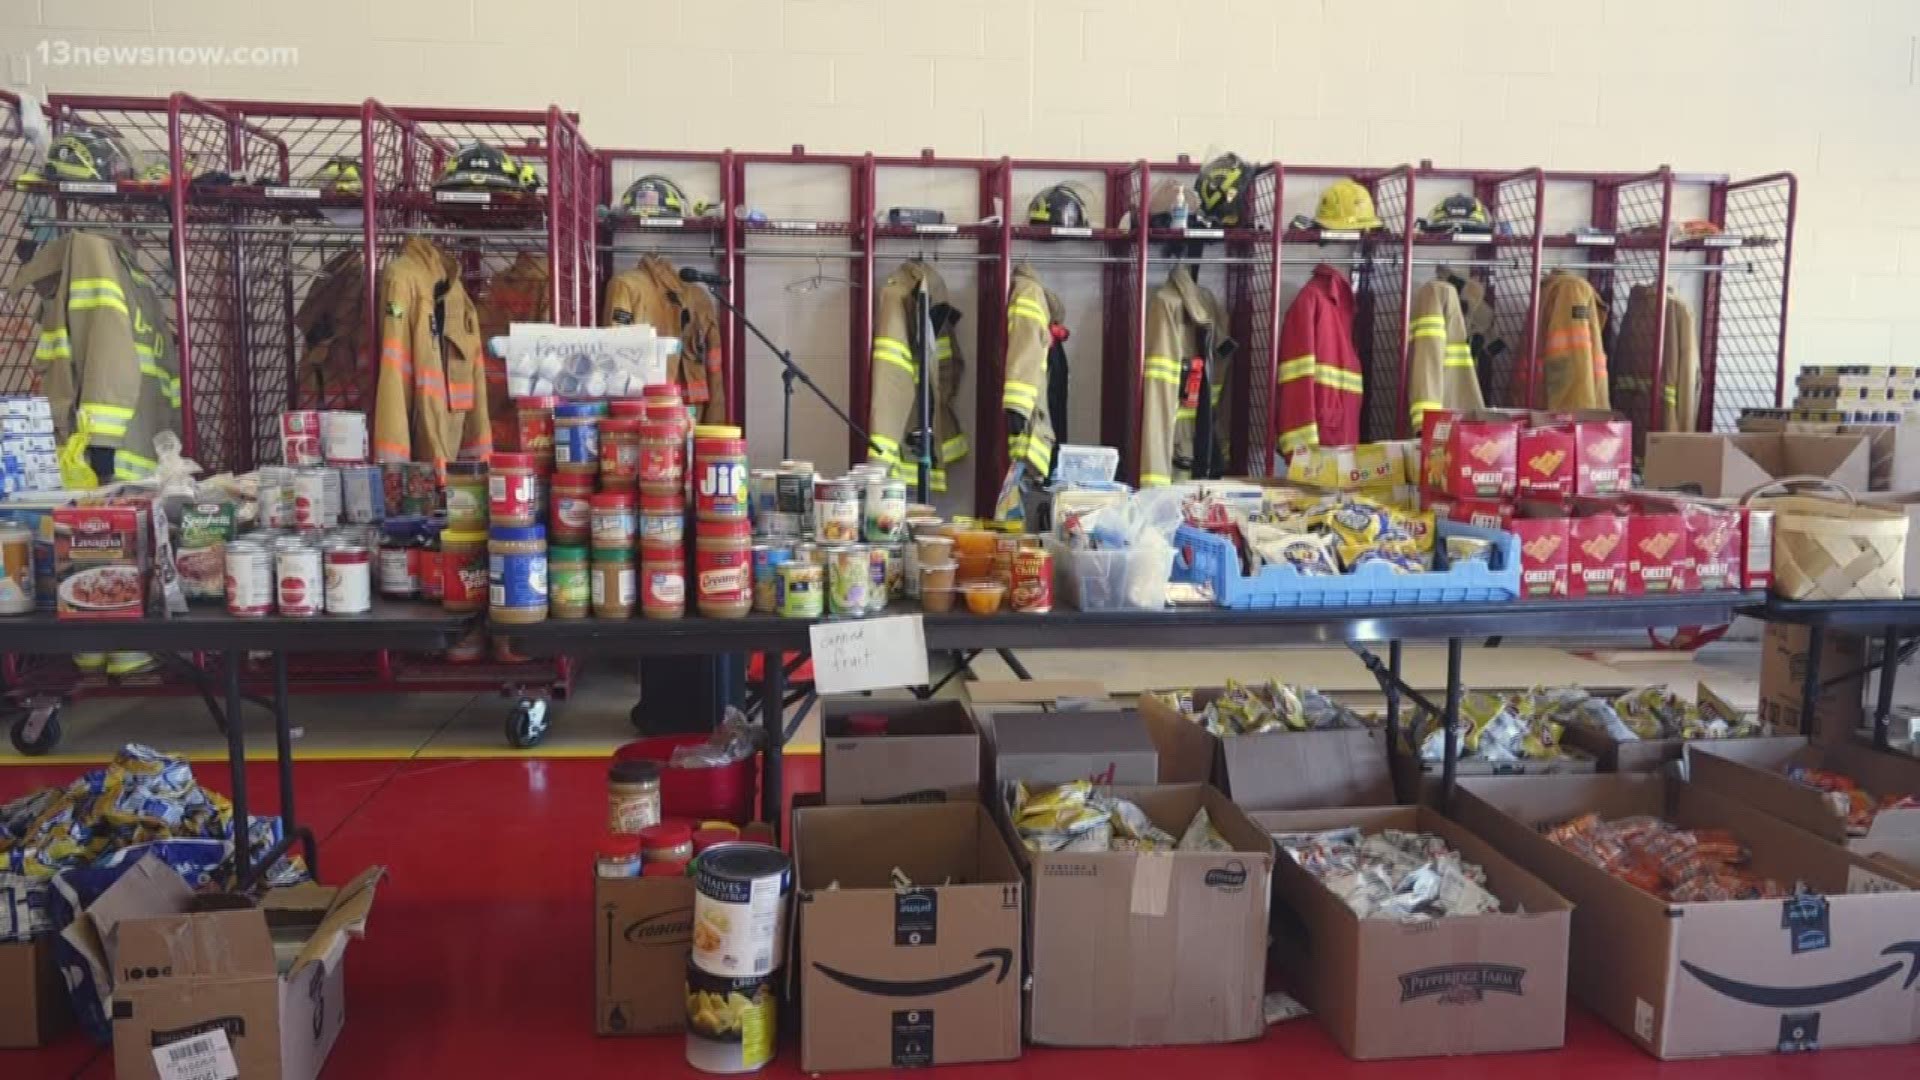 Supplies are being brought to a fire station turned supply pick-up. The locals are calling it 'Fire-Mart.' Despite the devastation, neighbors are helping each other.